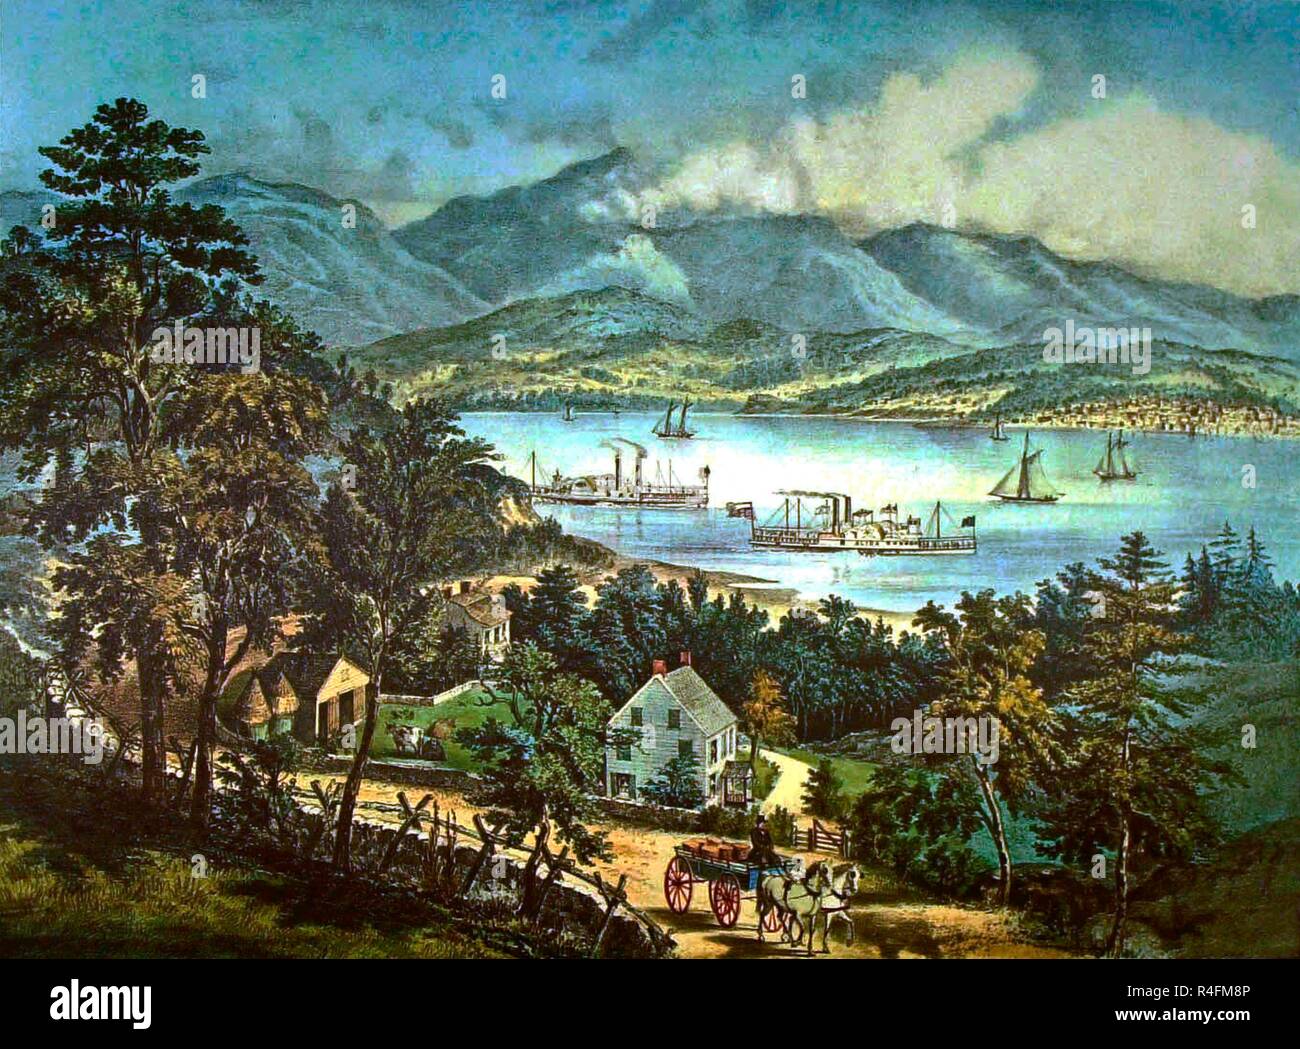 The Catskill Mountains from the Eastern shore of the Hudson - 1900 - colour lithograph. Author: Currier and Ives. Location: PRIVATE COLLECTION. Stock Photo